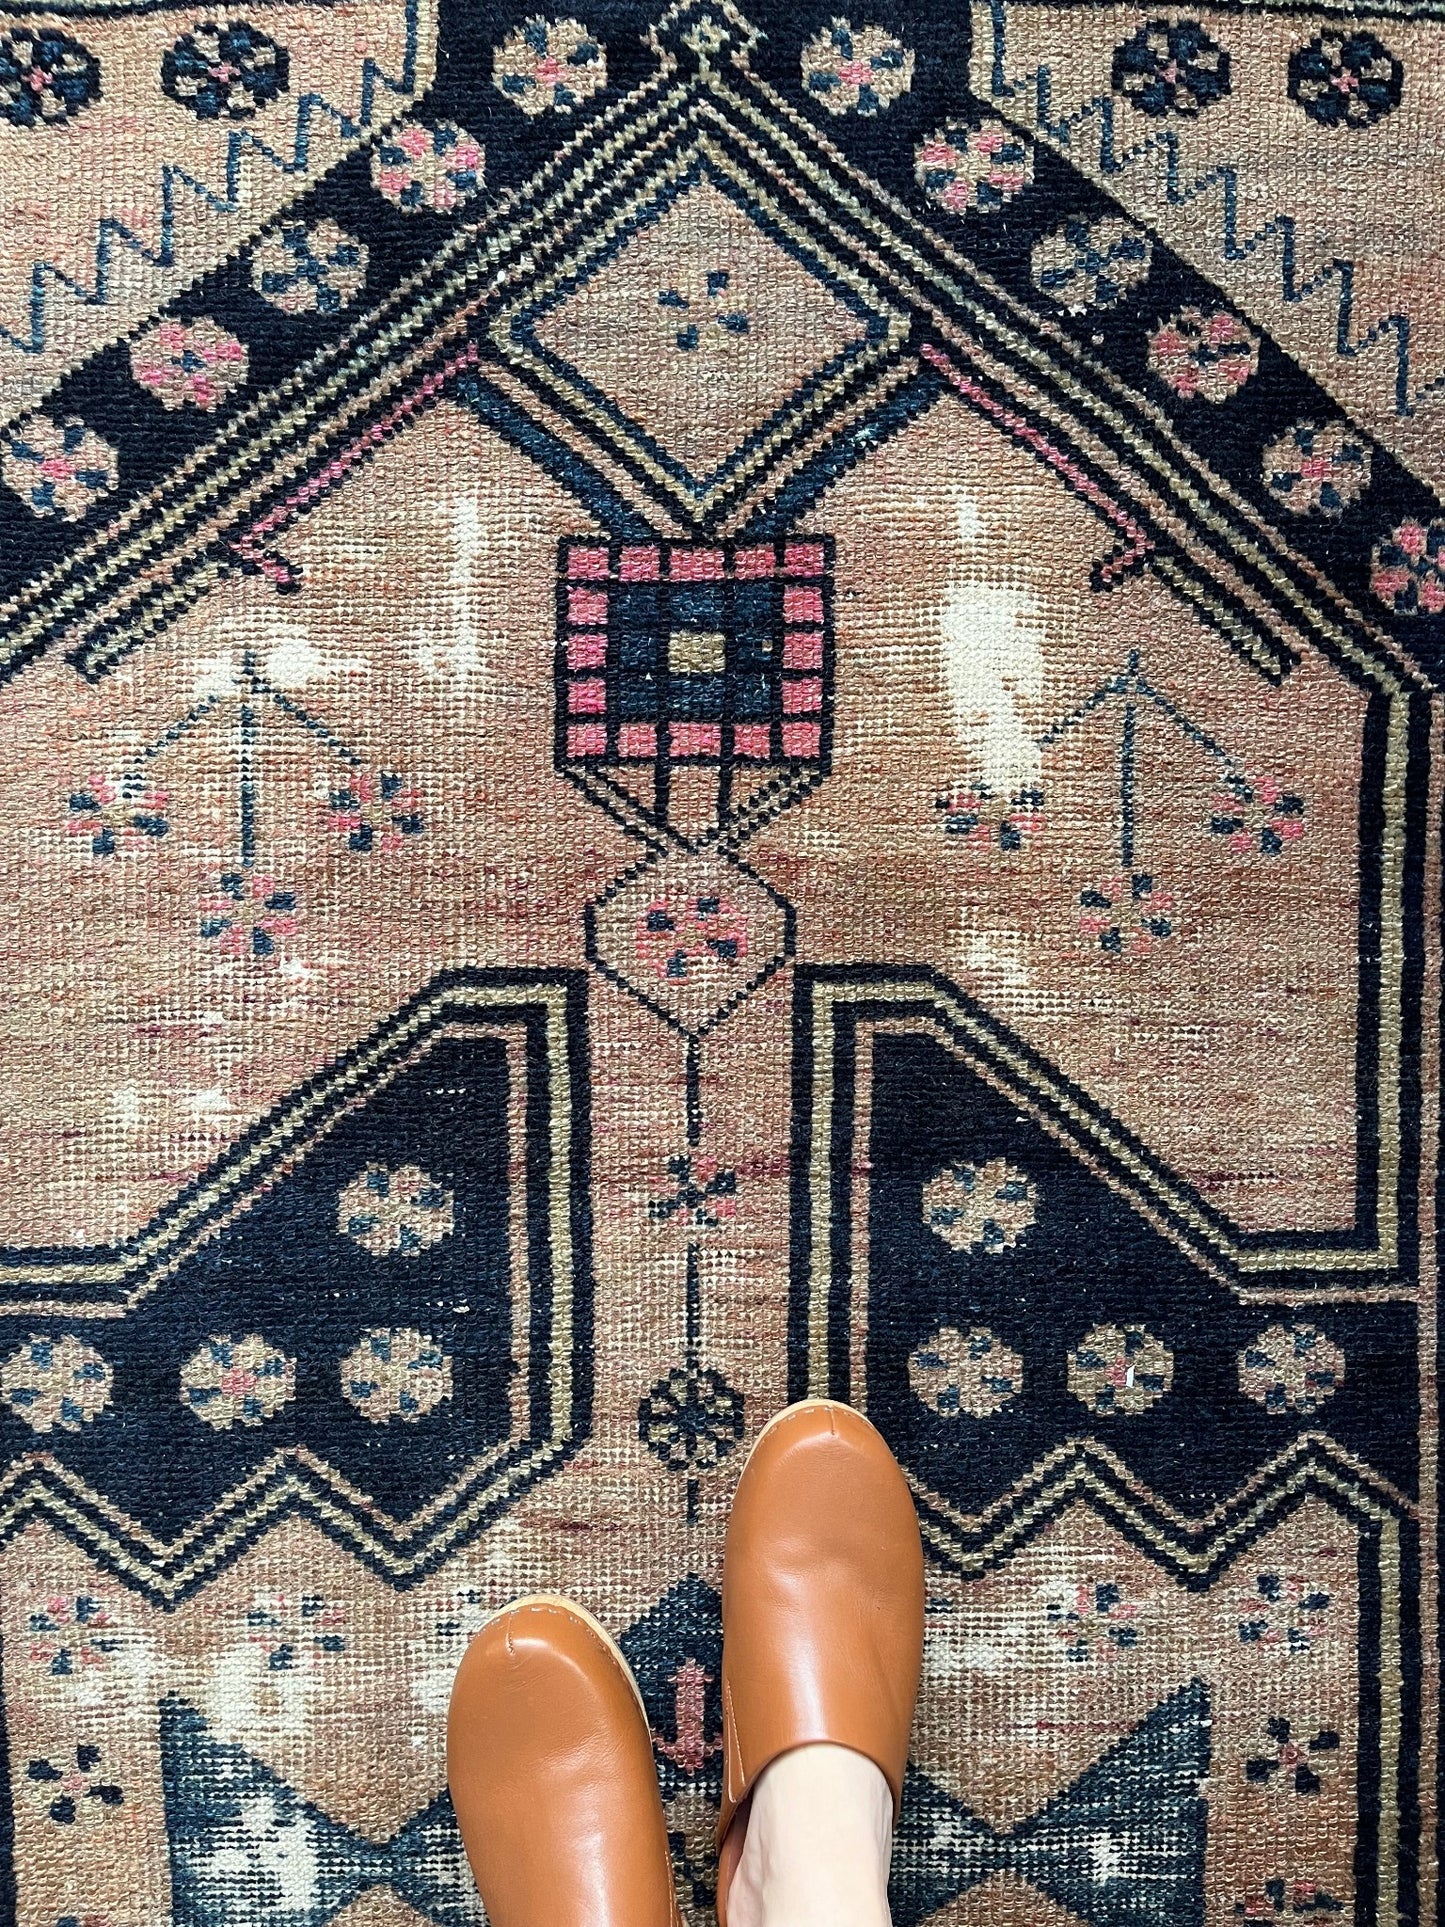 See Details of Worn Areas on Arbor Persian Rug